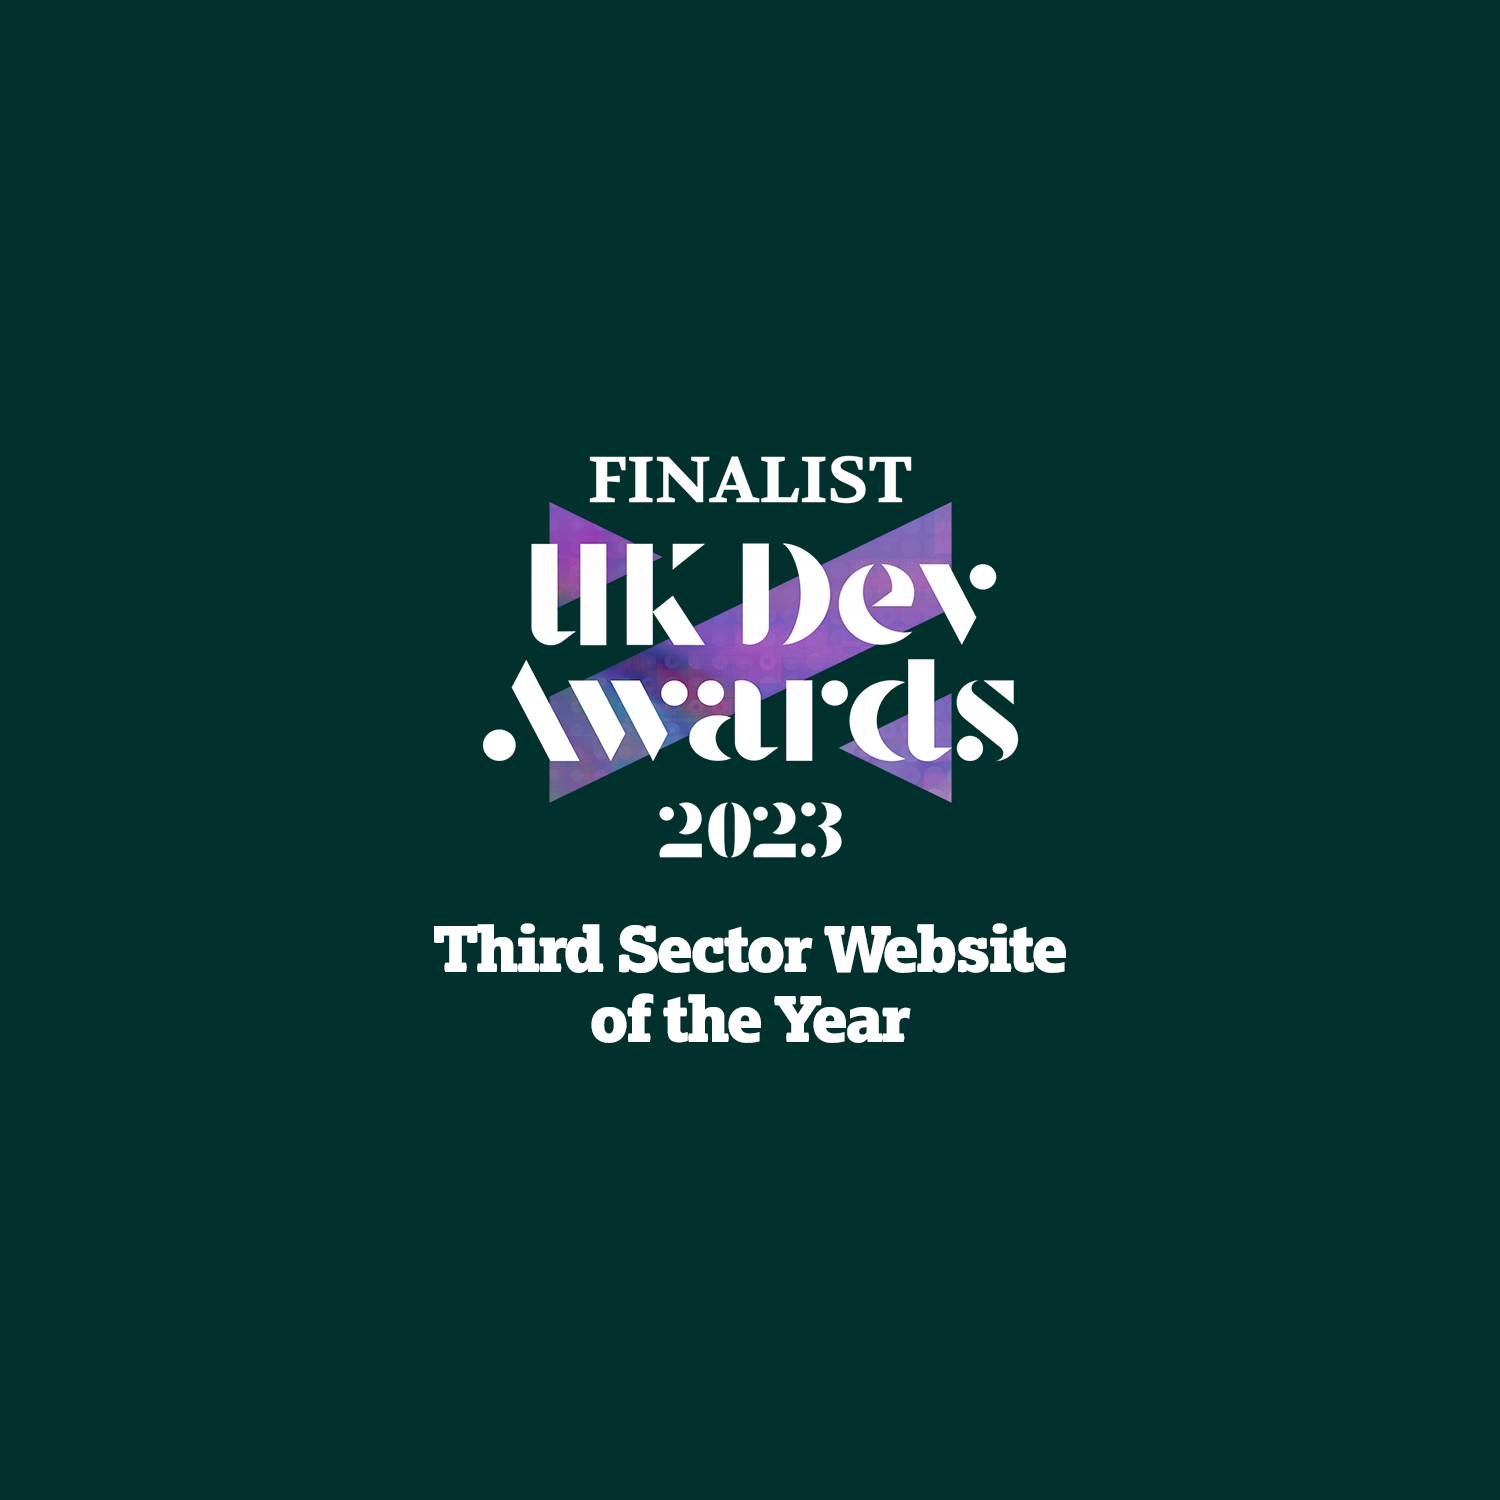 Finalist for the 'Third Sector Website of the Year' in the UK Dev Awards 2023